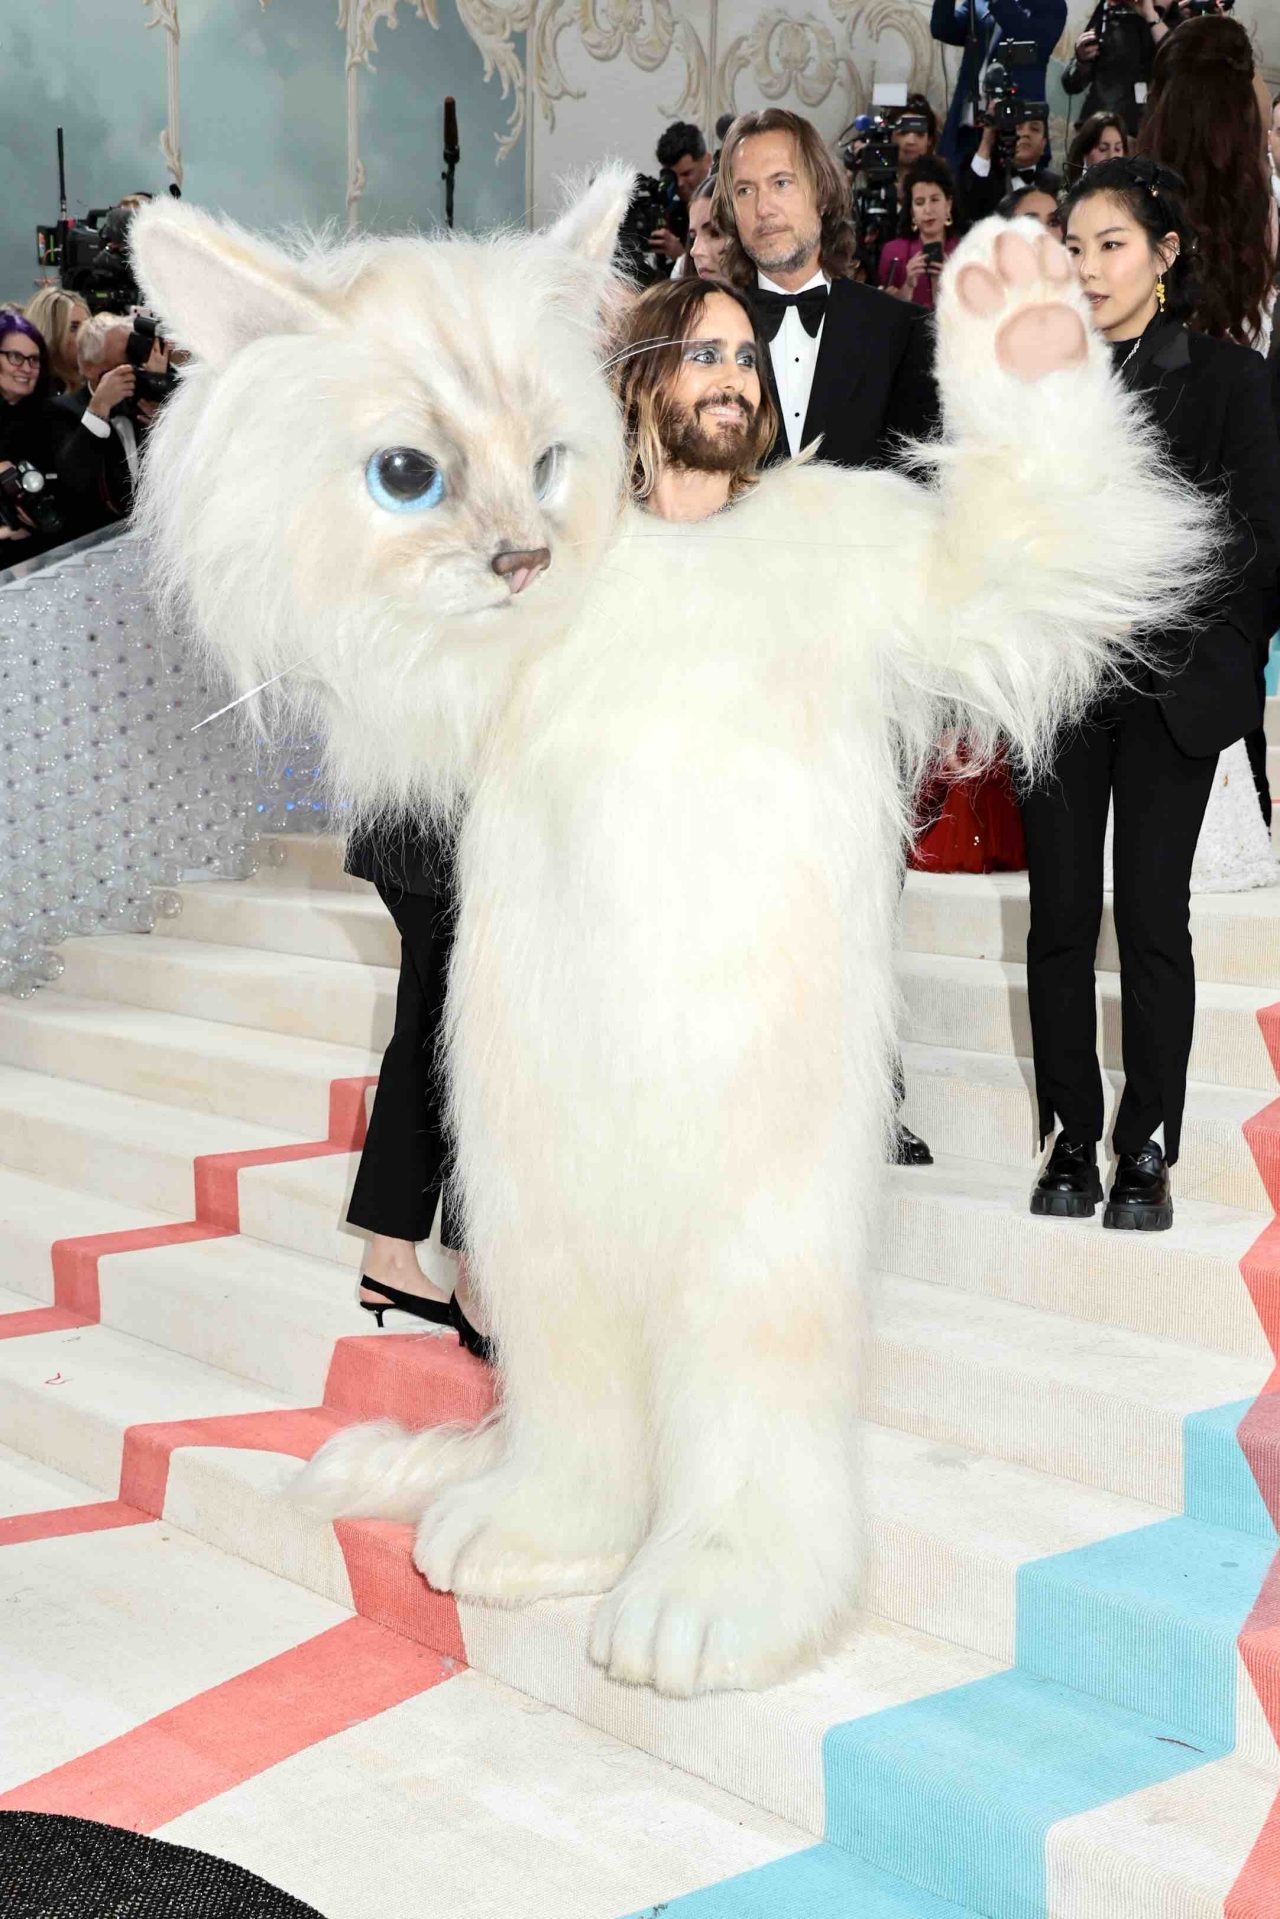 NEW YORK, NEW YORK - MAY 01: Jared Leto, dressed as Karl Lagerfeld's cat Choupette, attends The 2023 Met Gala Celebrating "Karl Lagerfeld: A Line Of Beauty" at The Metropolitan Museum of Art on May 01, 2023 in New York City. (Photo by Jamie McCarthy/Getty Images)